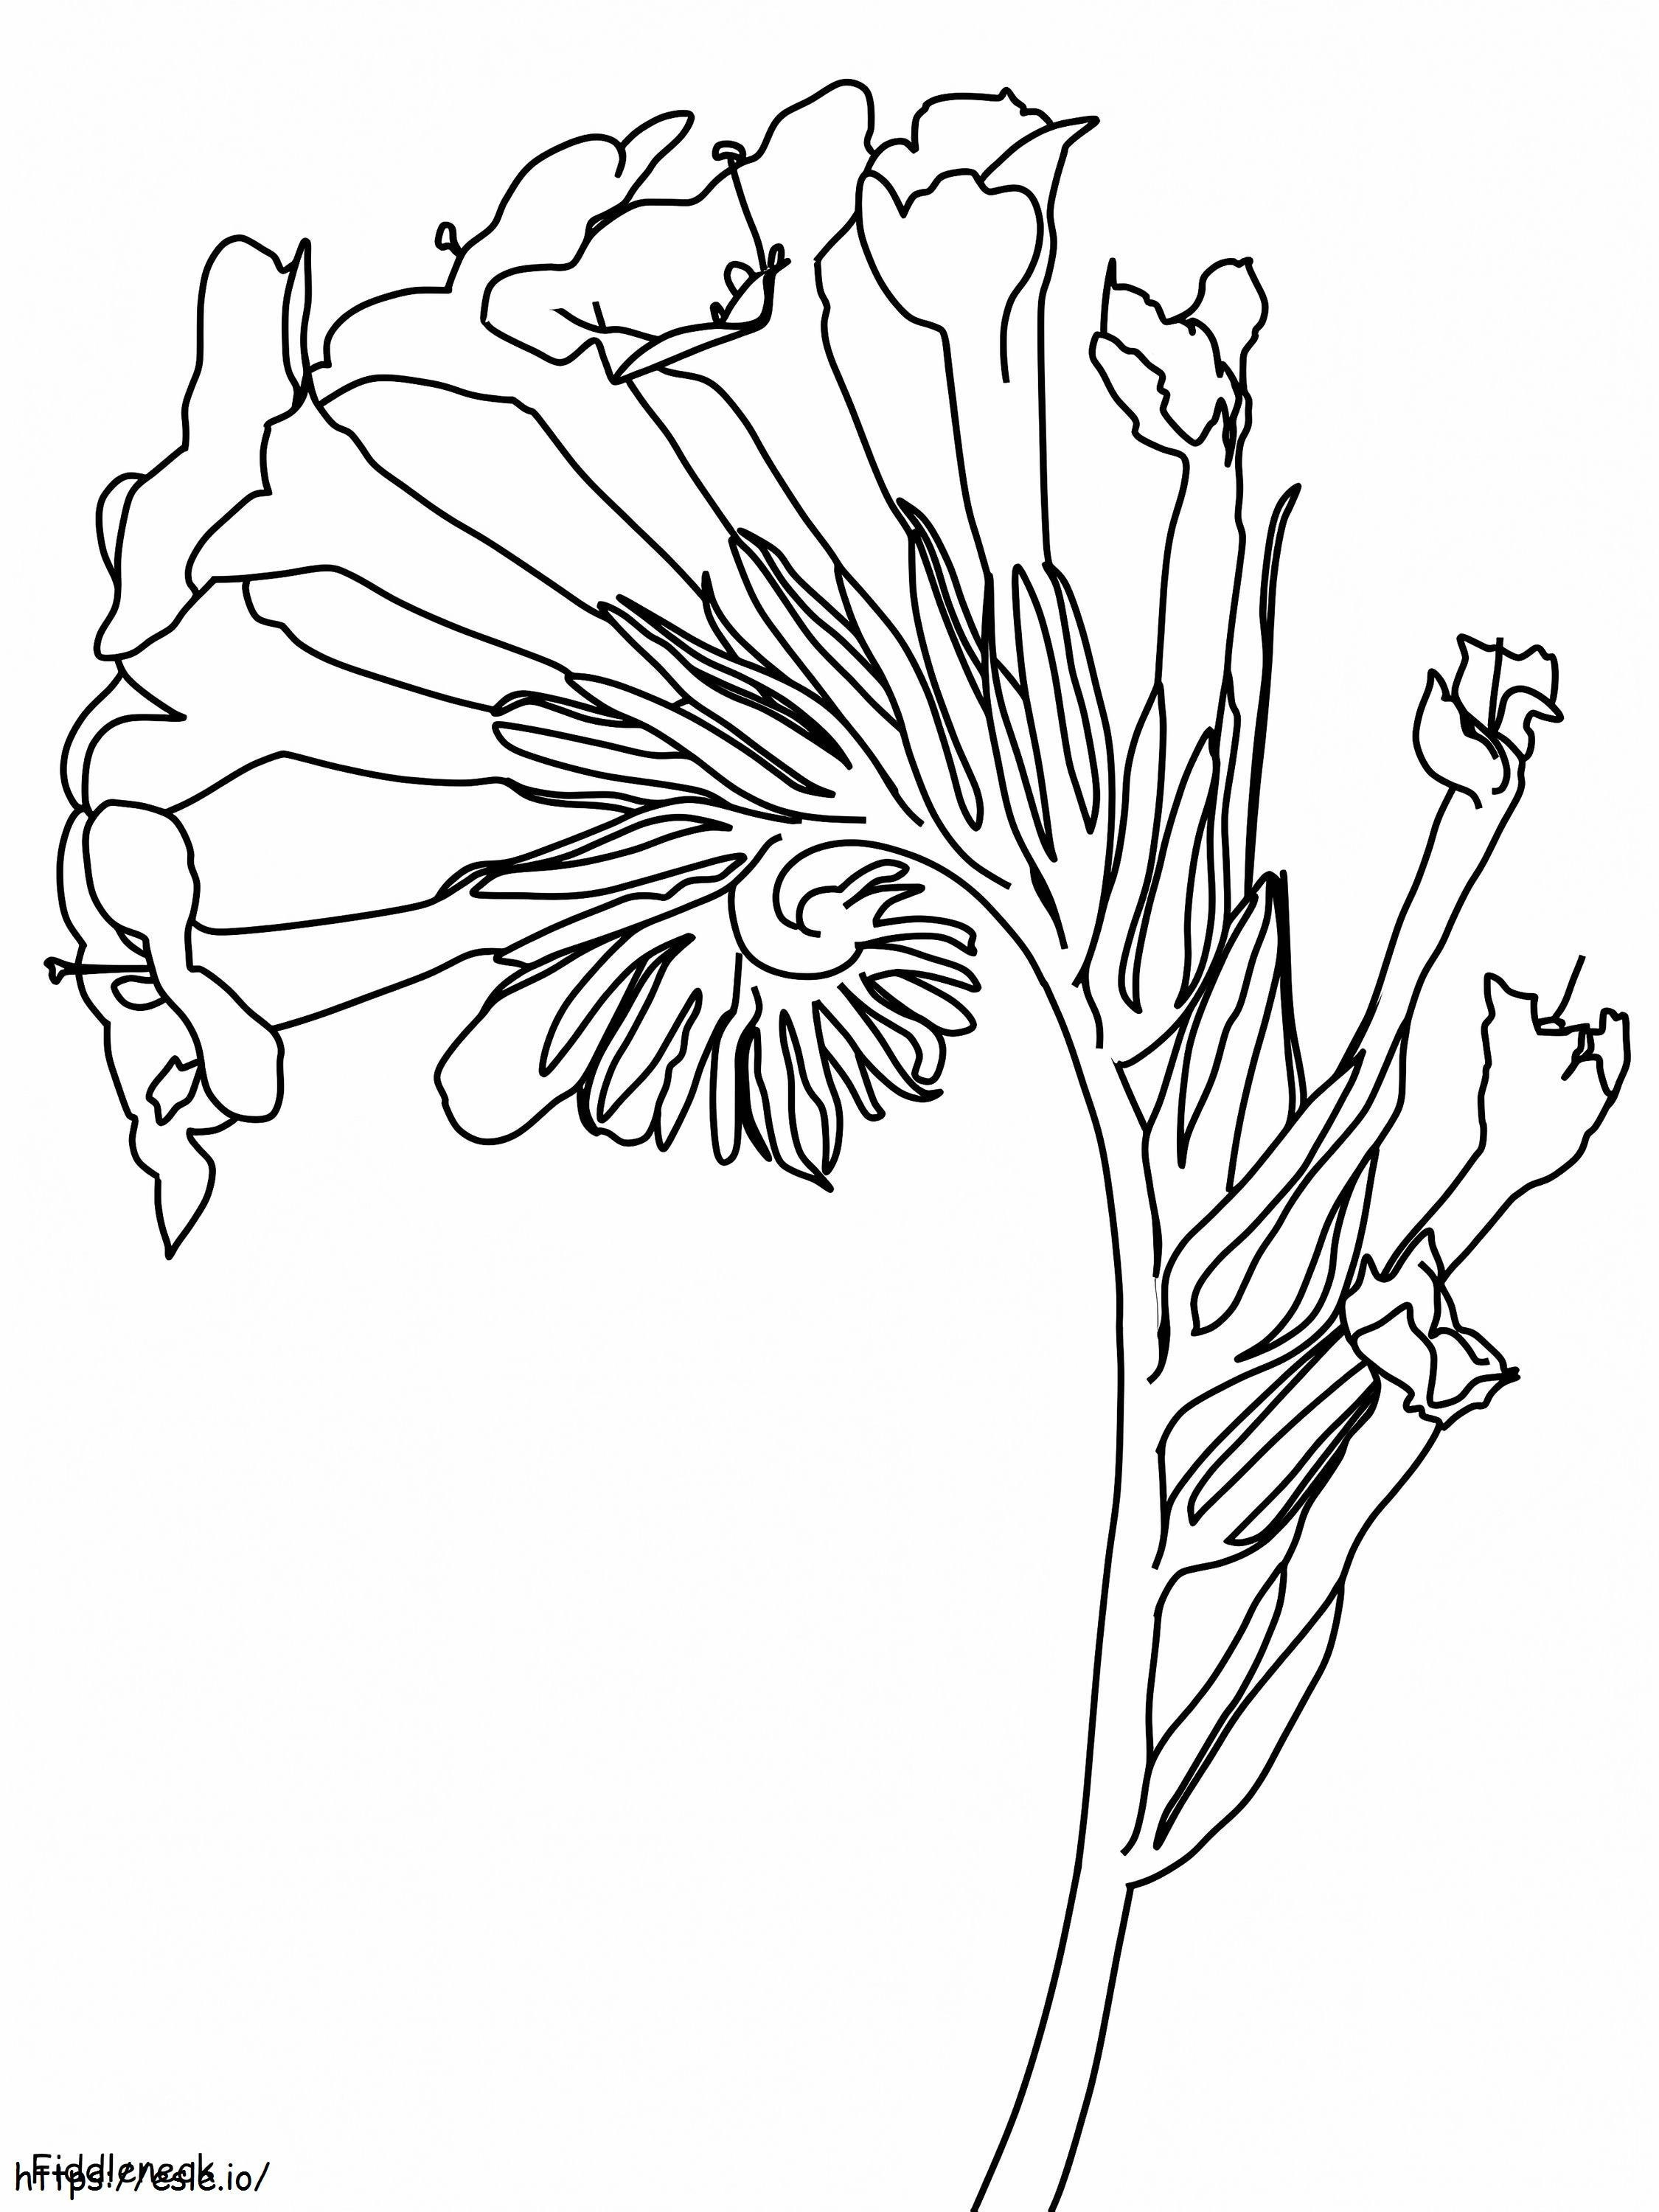 1528168302 Fiddlenecka4 coloring page